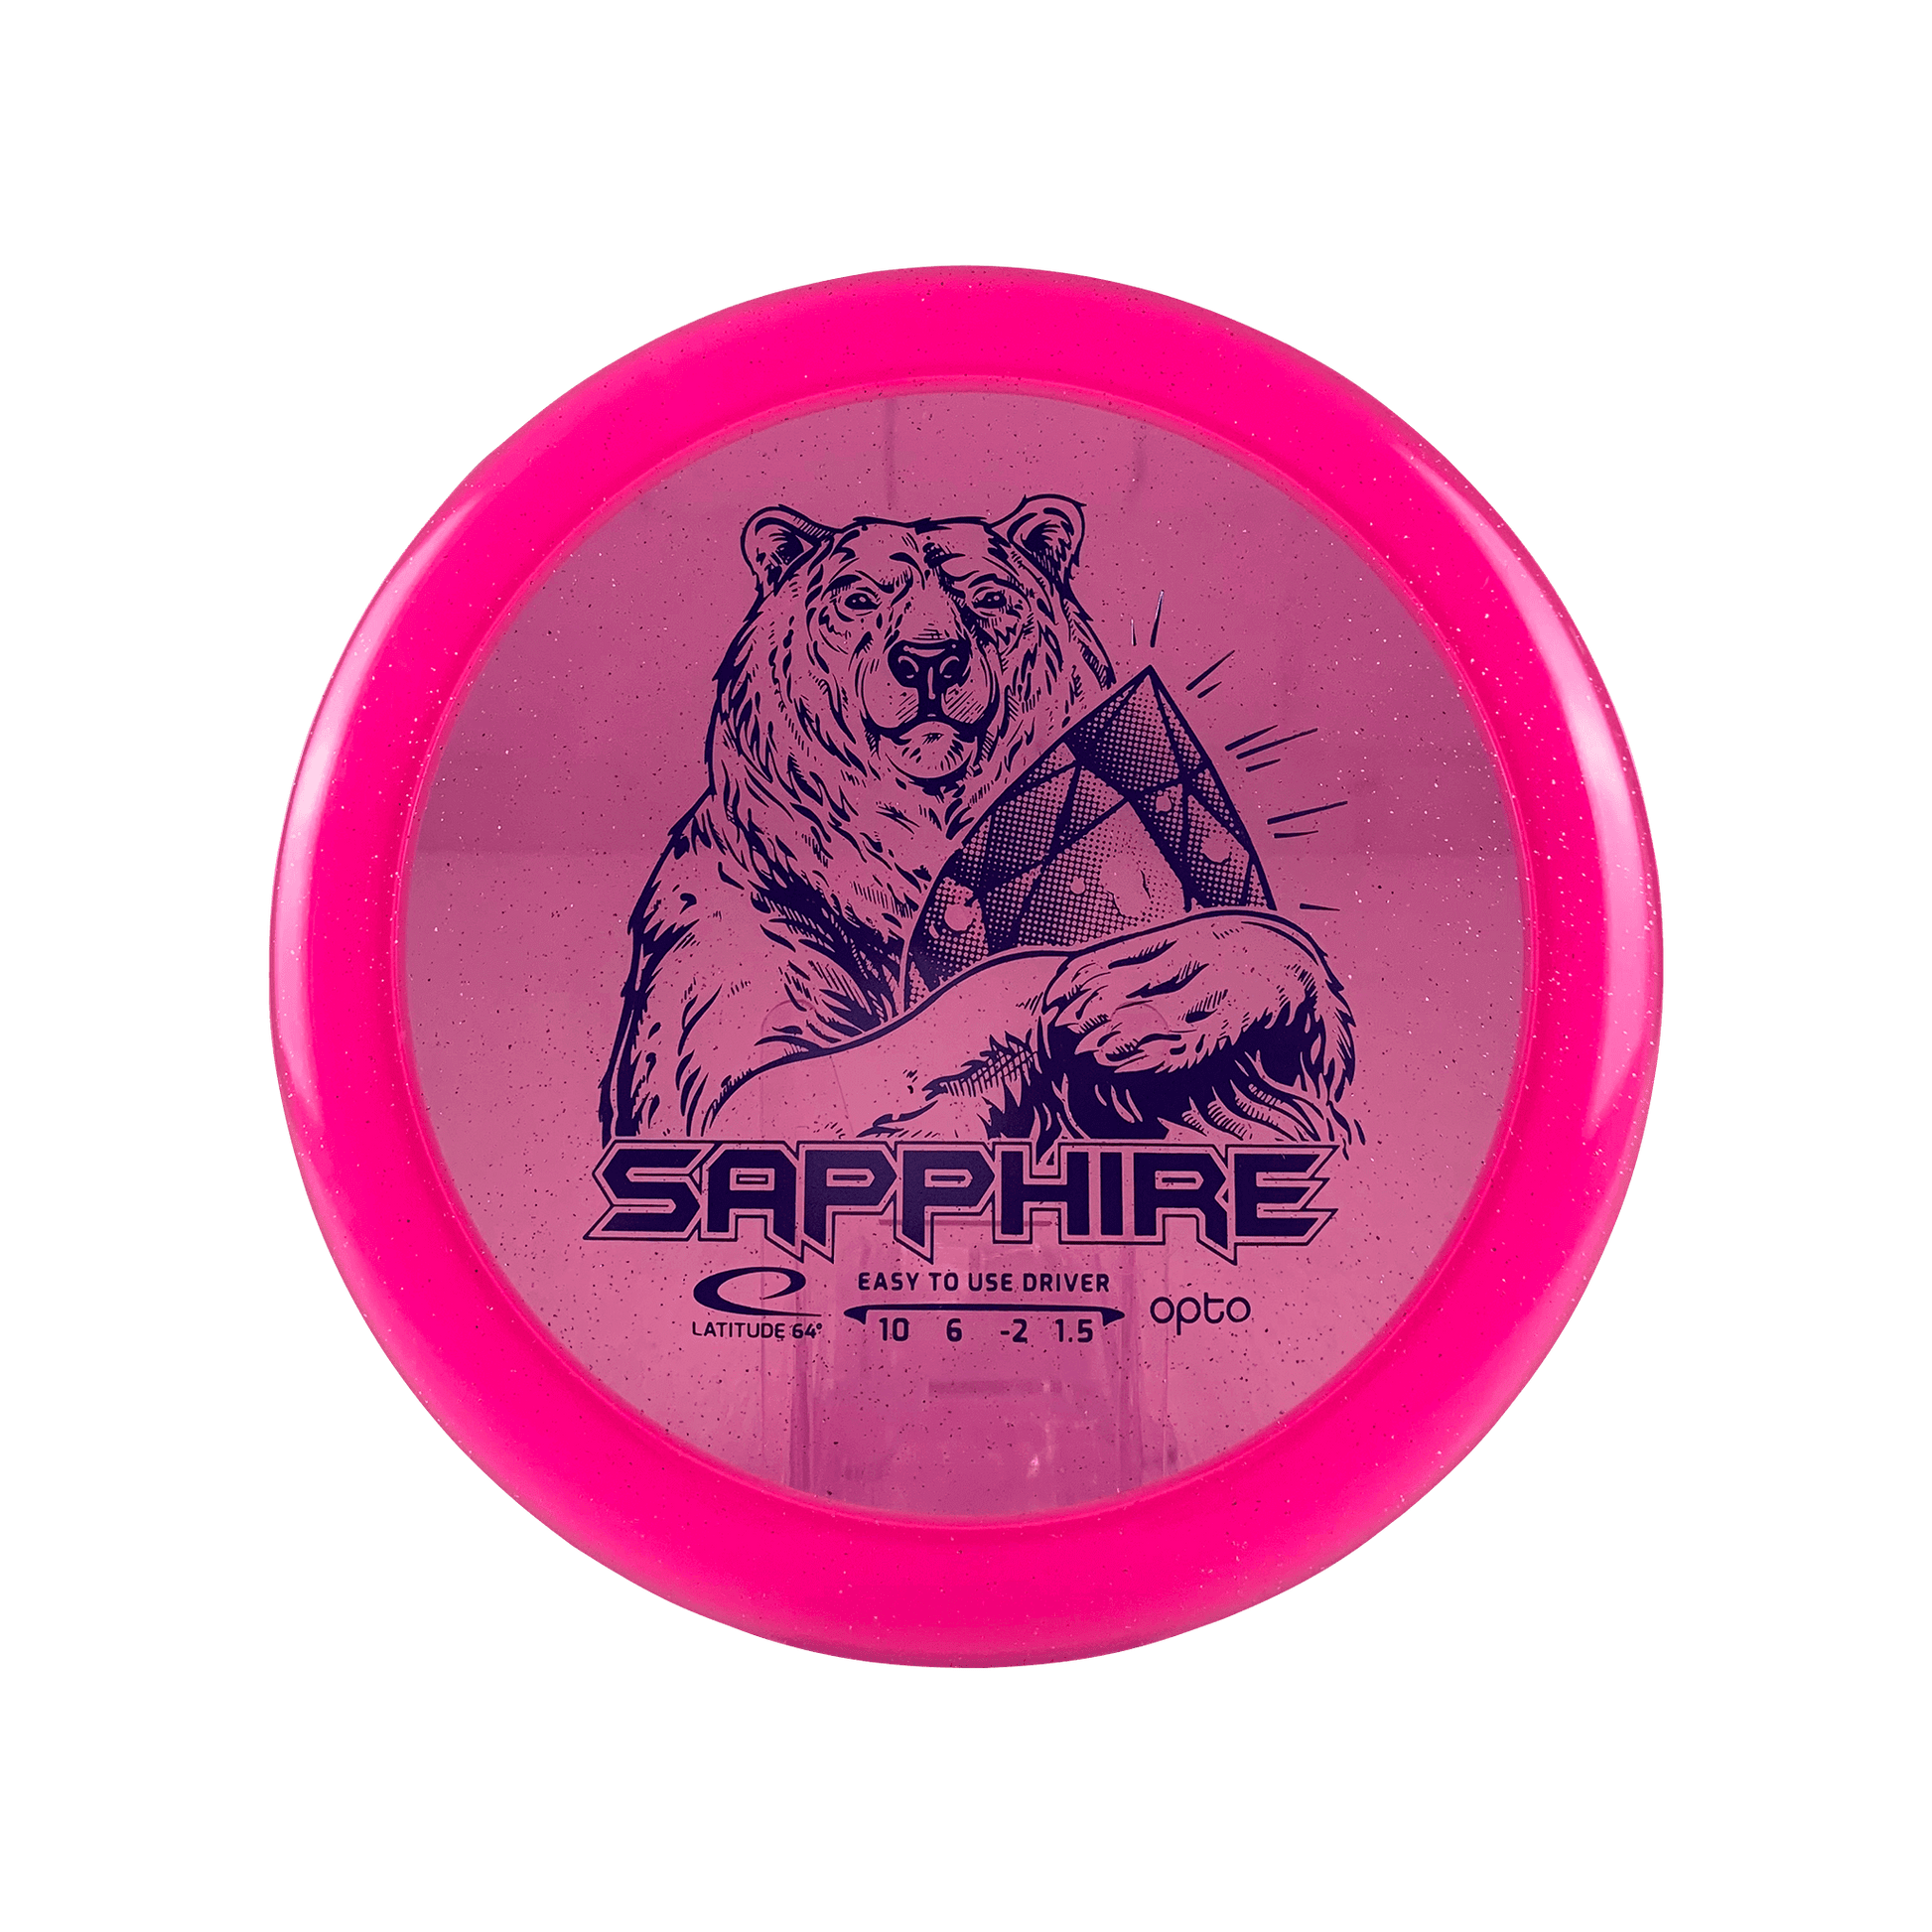 Opto Glimmer Sapphire Disc Latitude 64 clear pink 162 